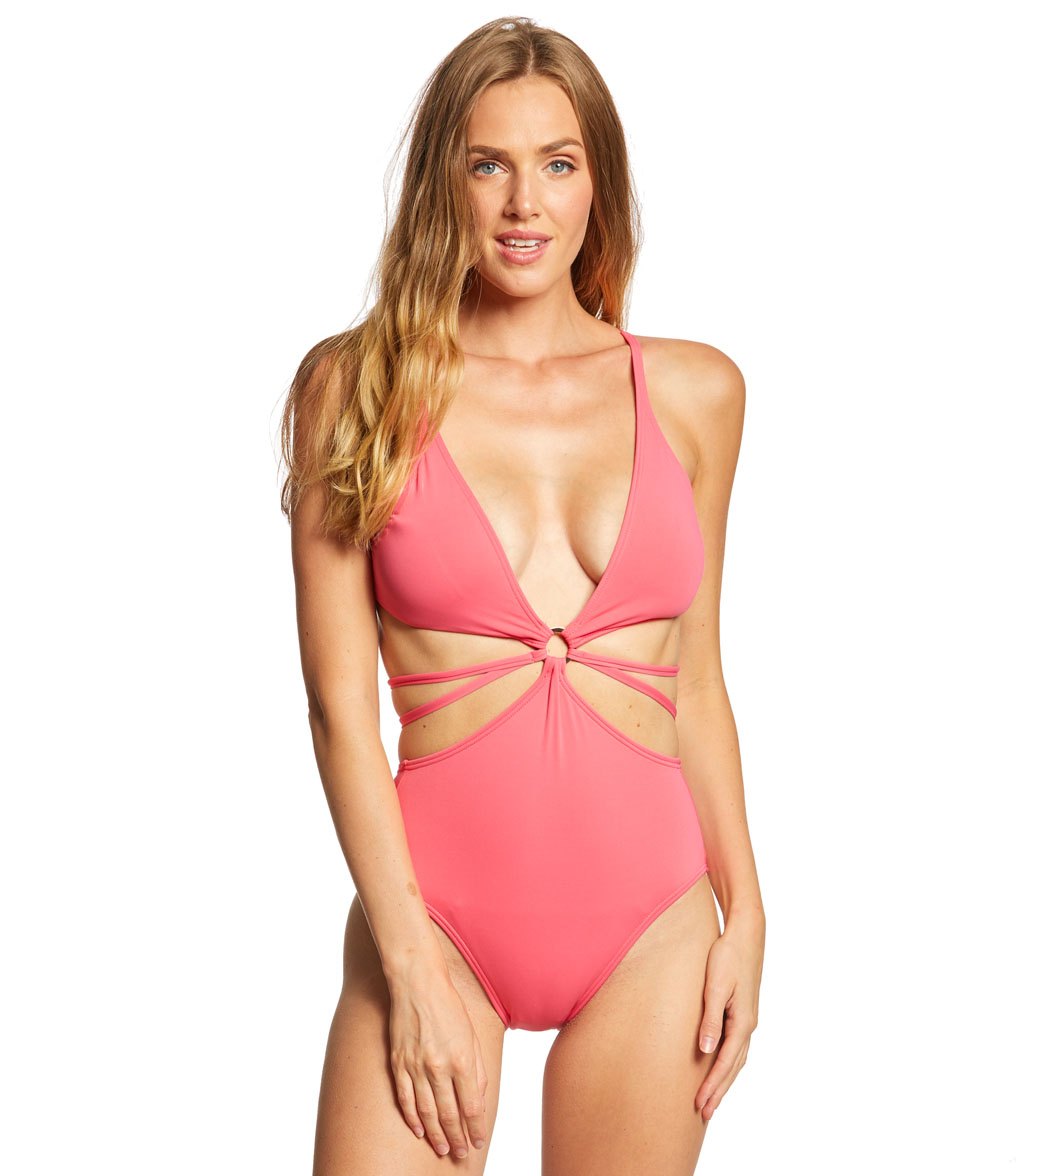 Vince Camuto Shore Shades Strappy One Piece Swimsuit - Hibiscus 12 - Swimoutlet.com